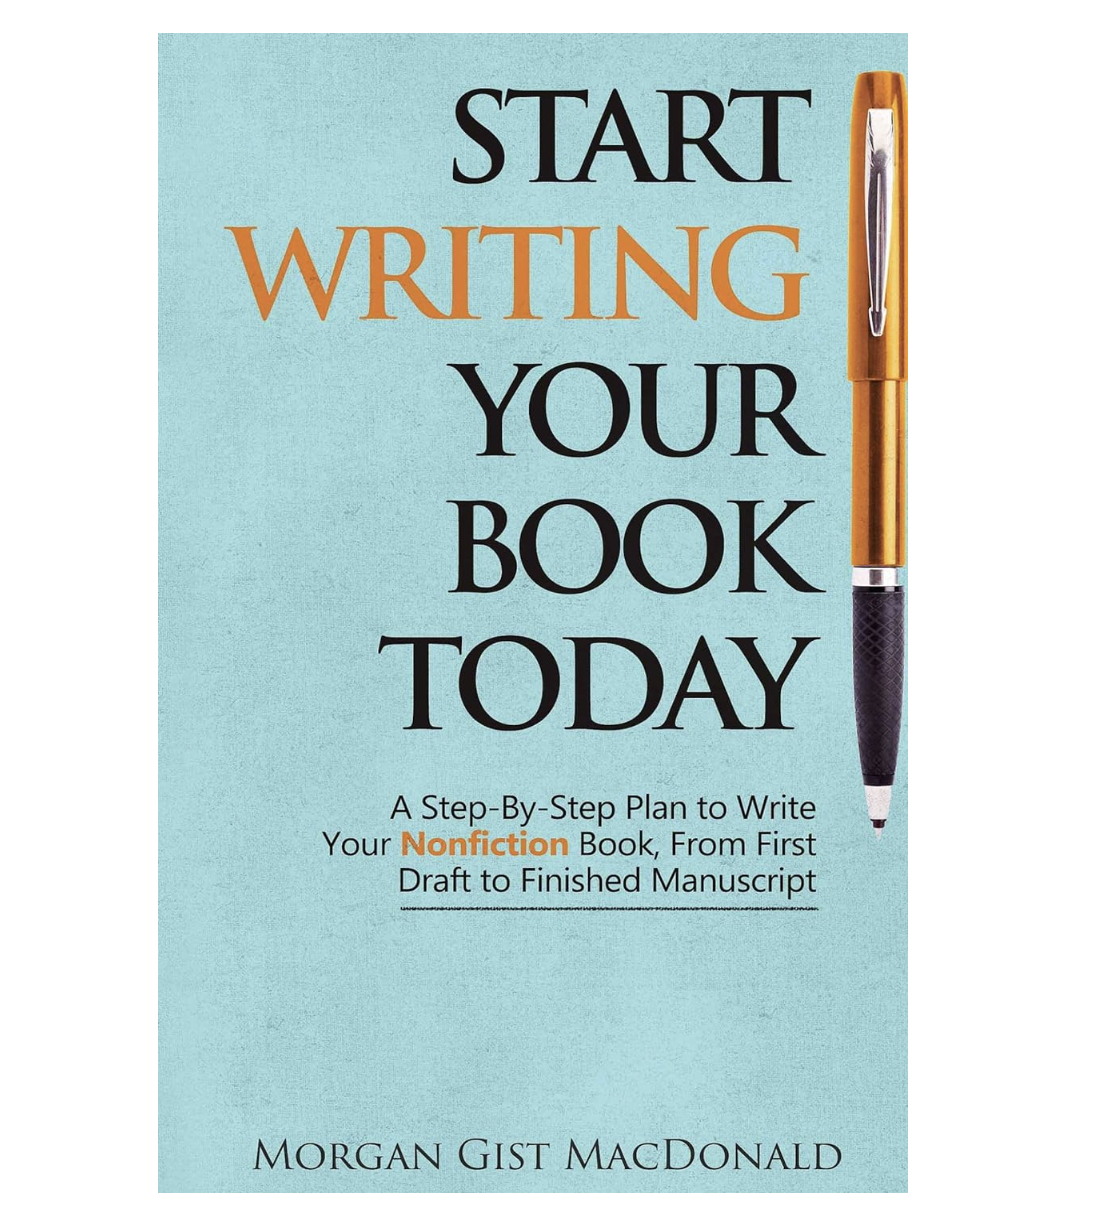 Start Writing Your Book Today: A Step-by-Step Plan to Write Your Nonfiction Book from Amazon